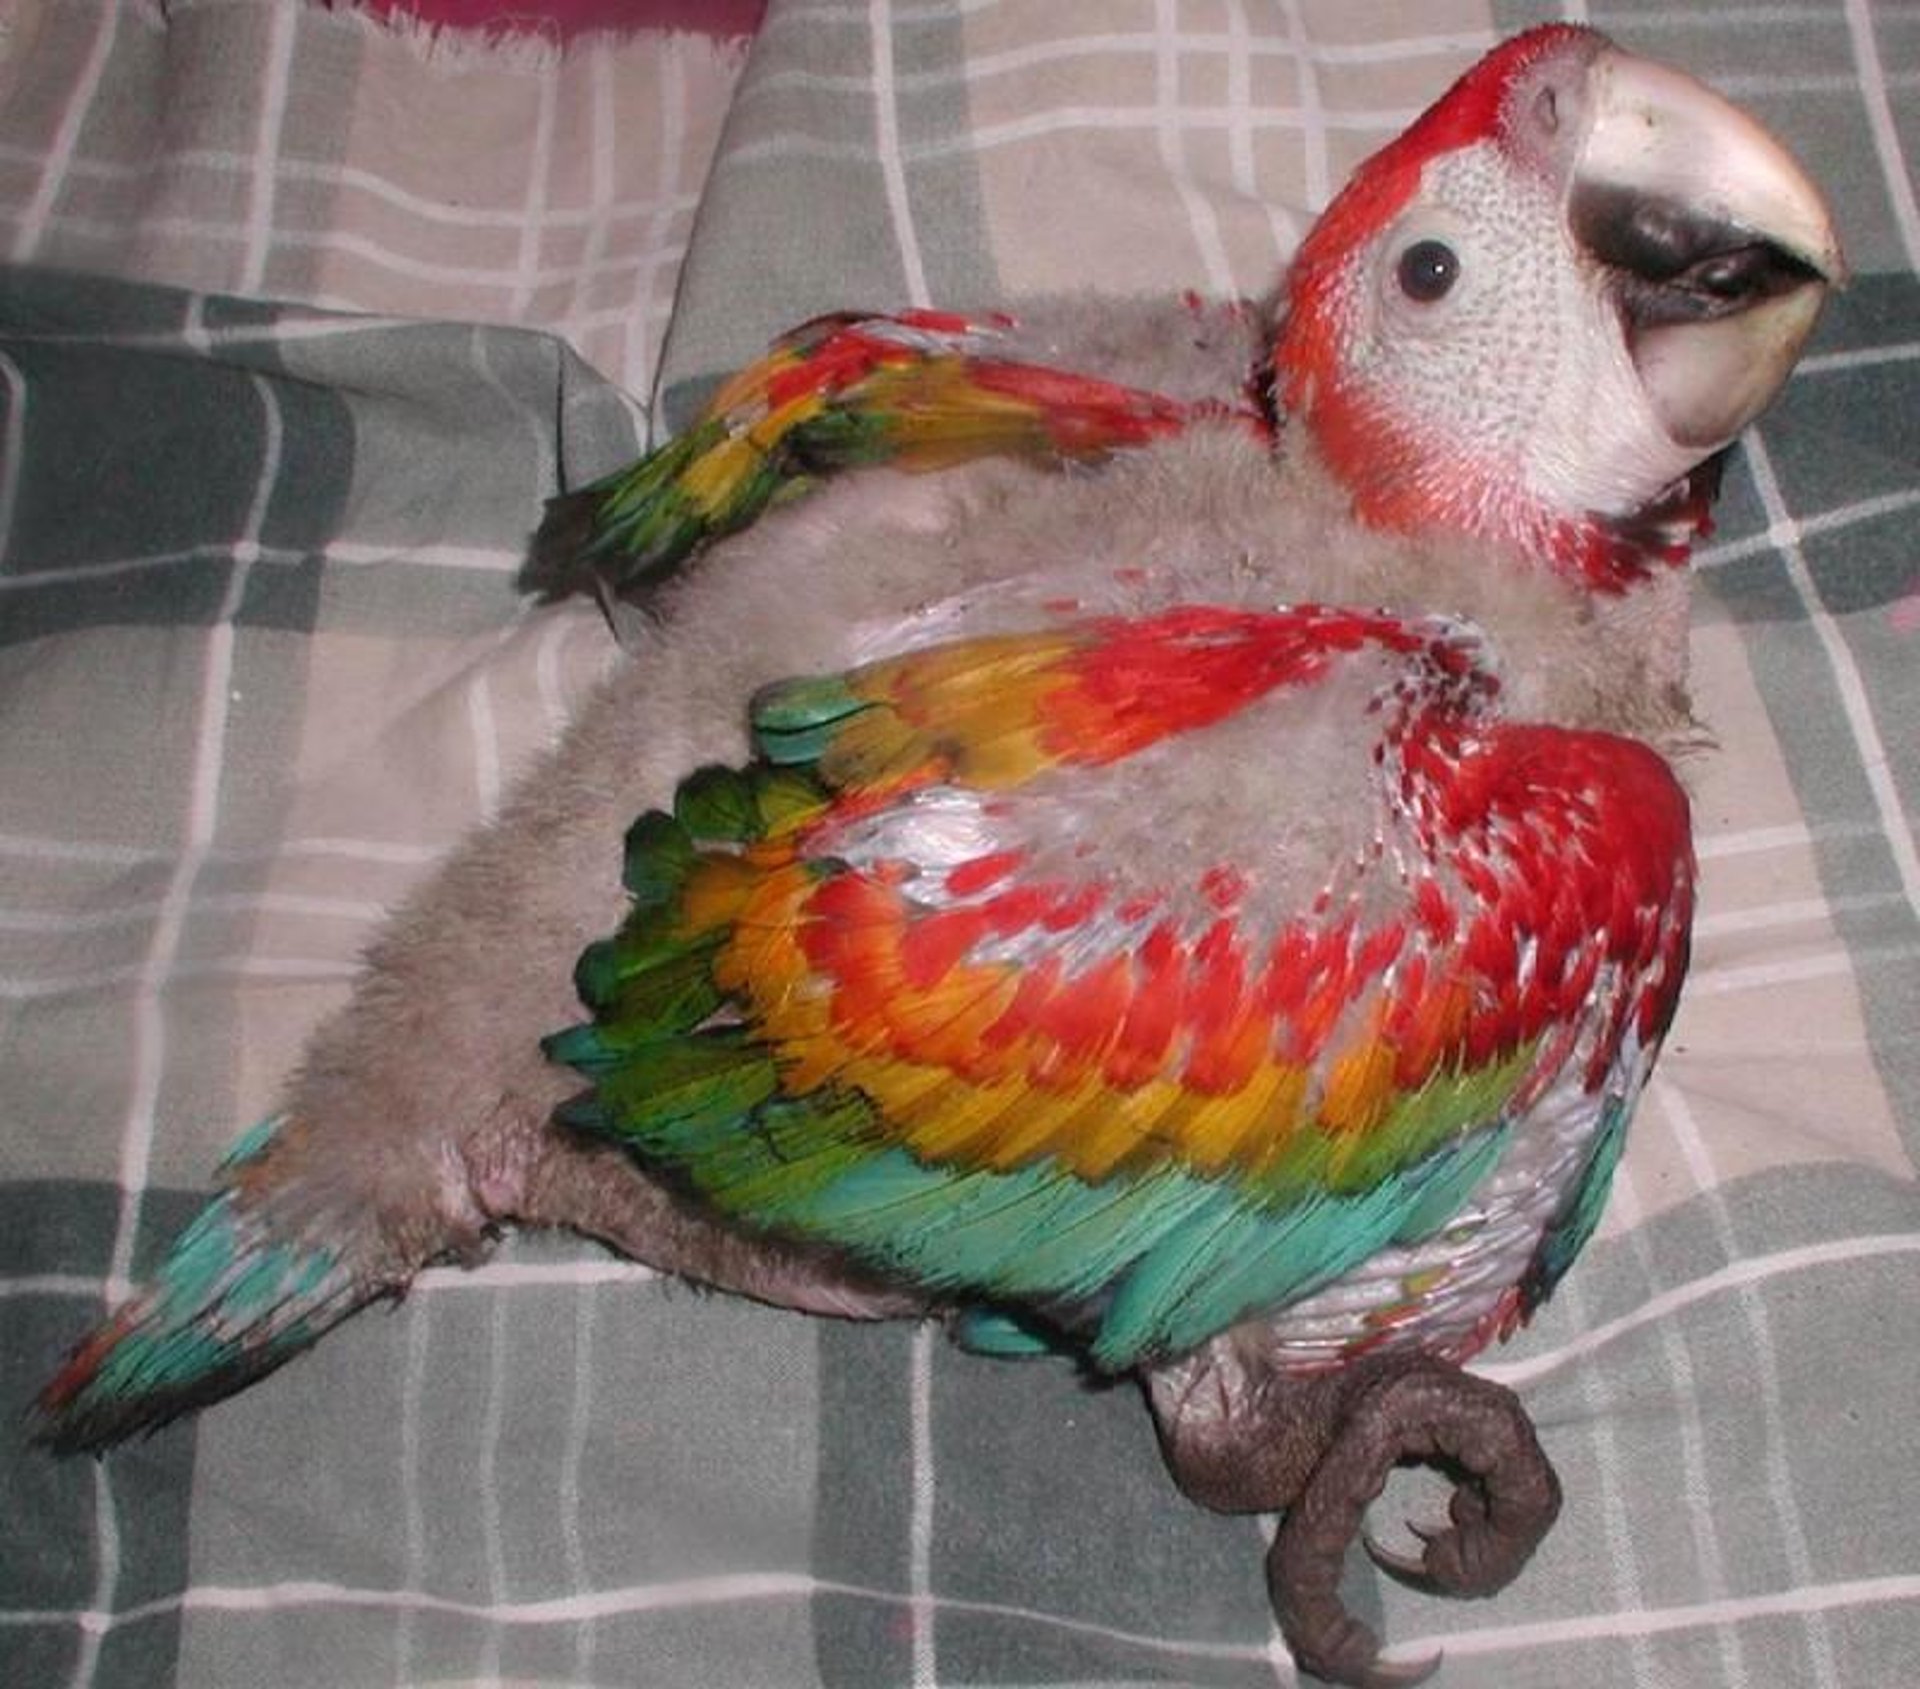 Scarlet macaw chick